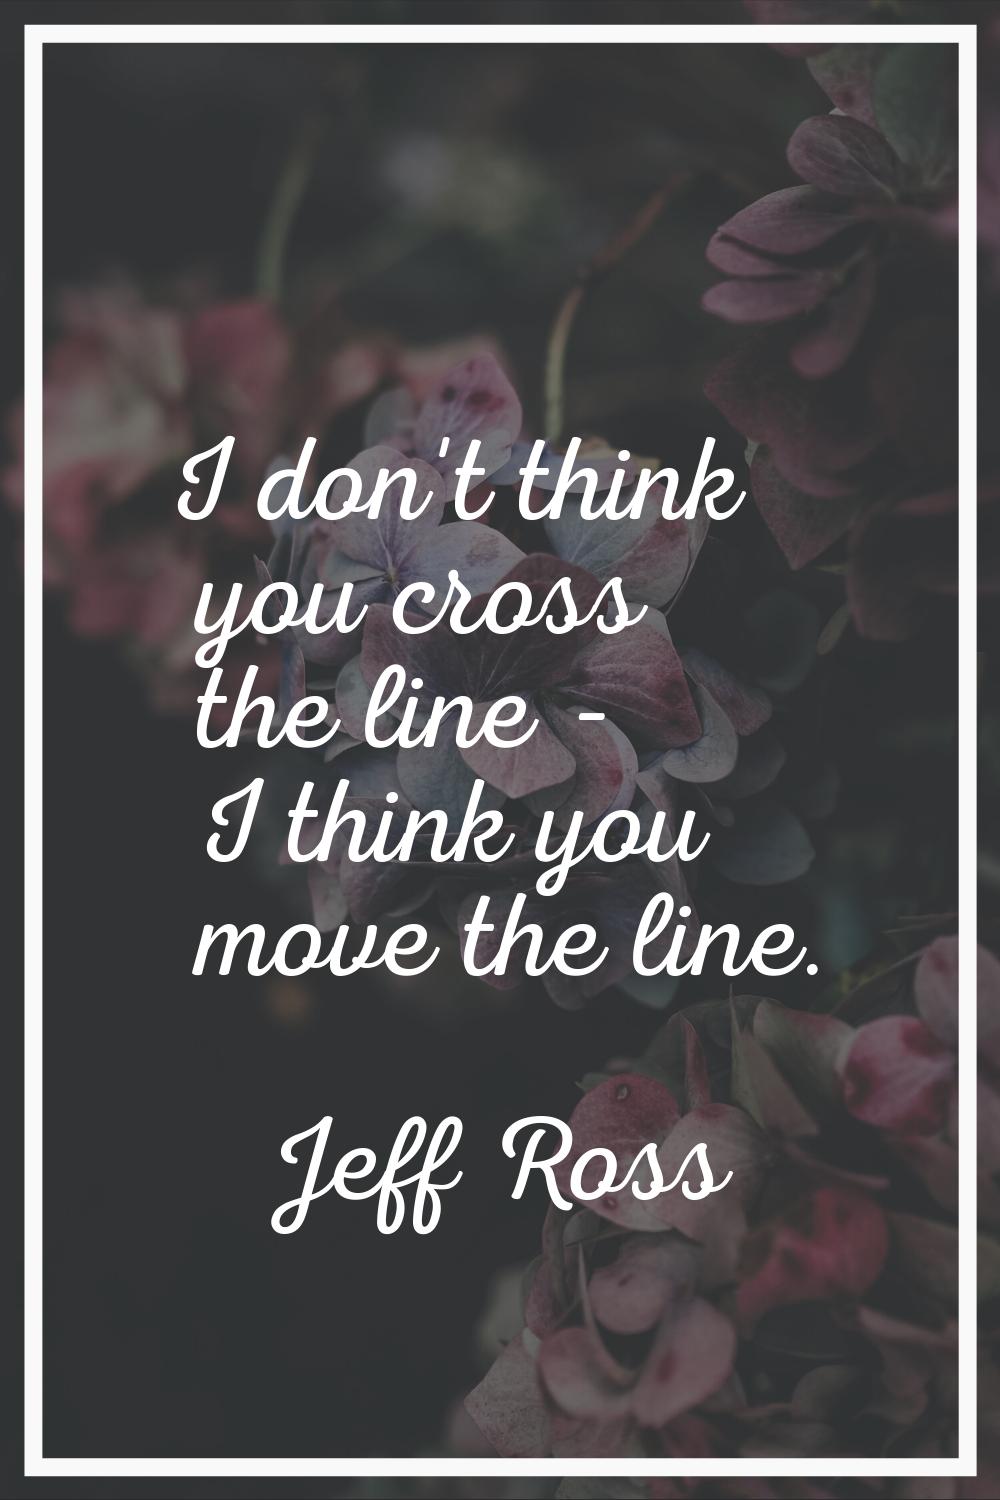 I don't think you cross the line - I think you move the line.